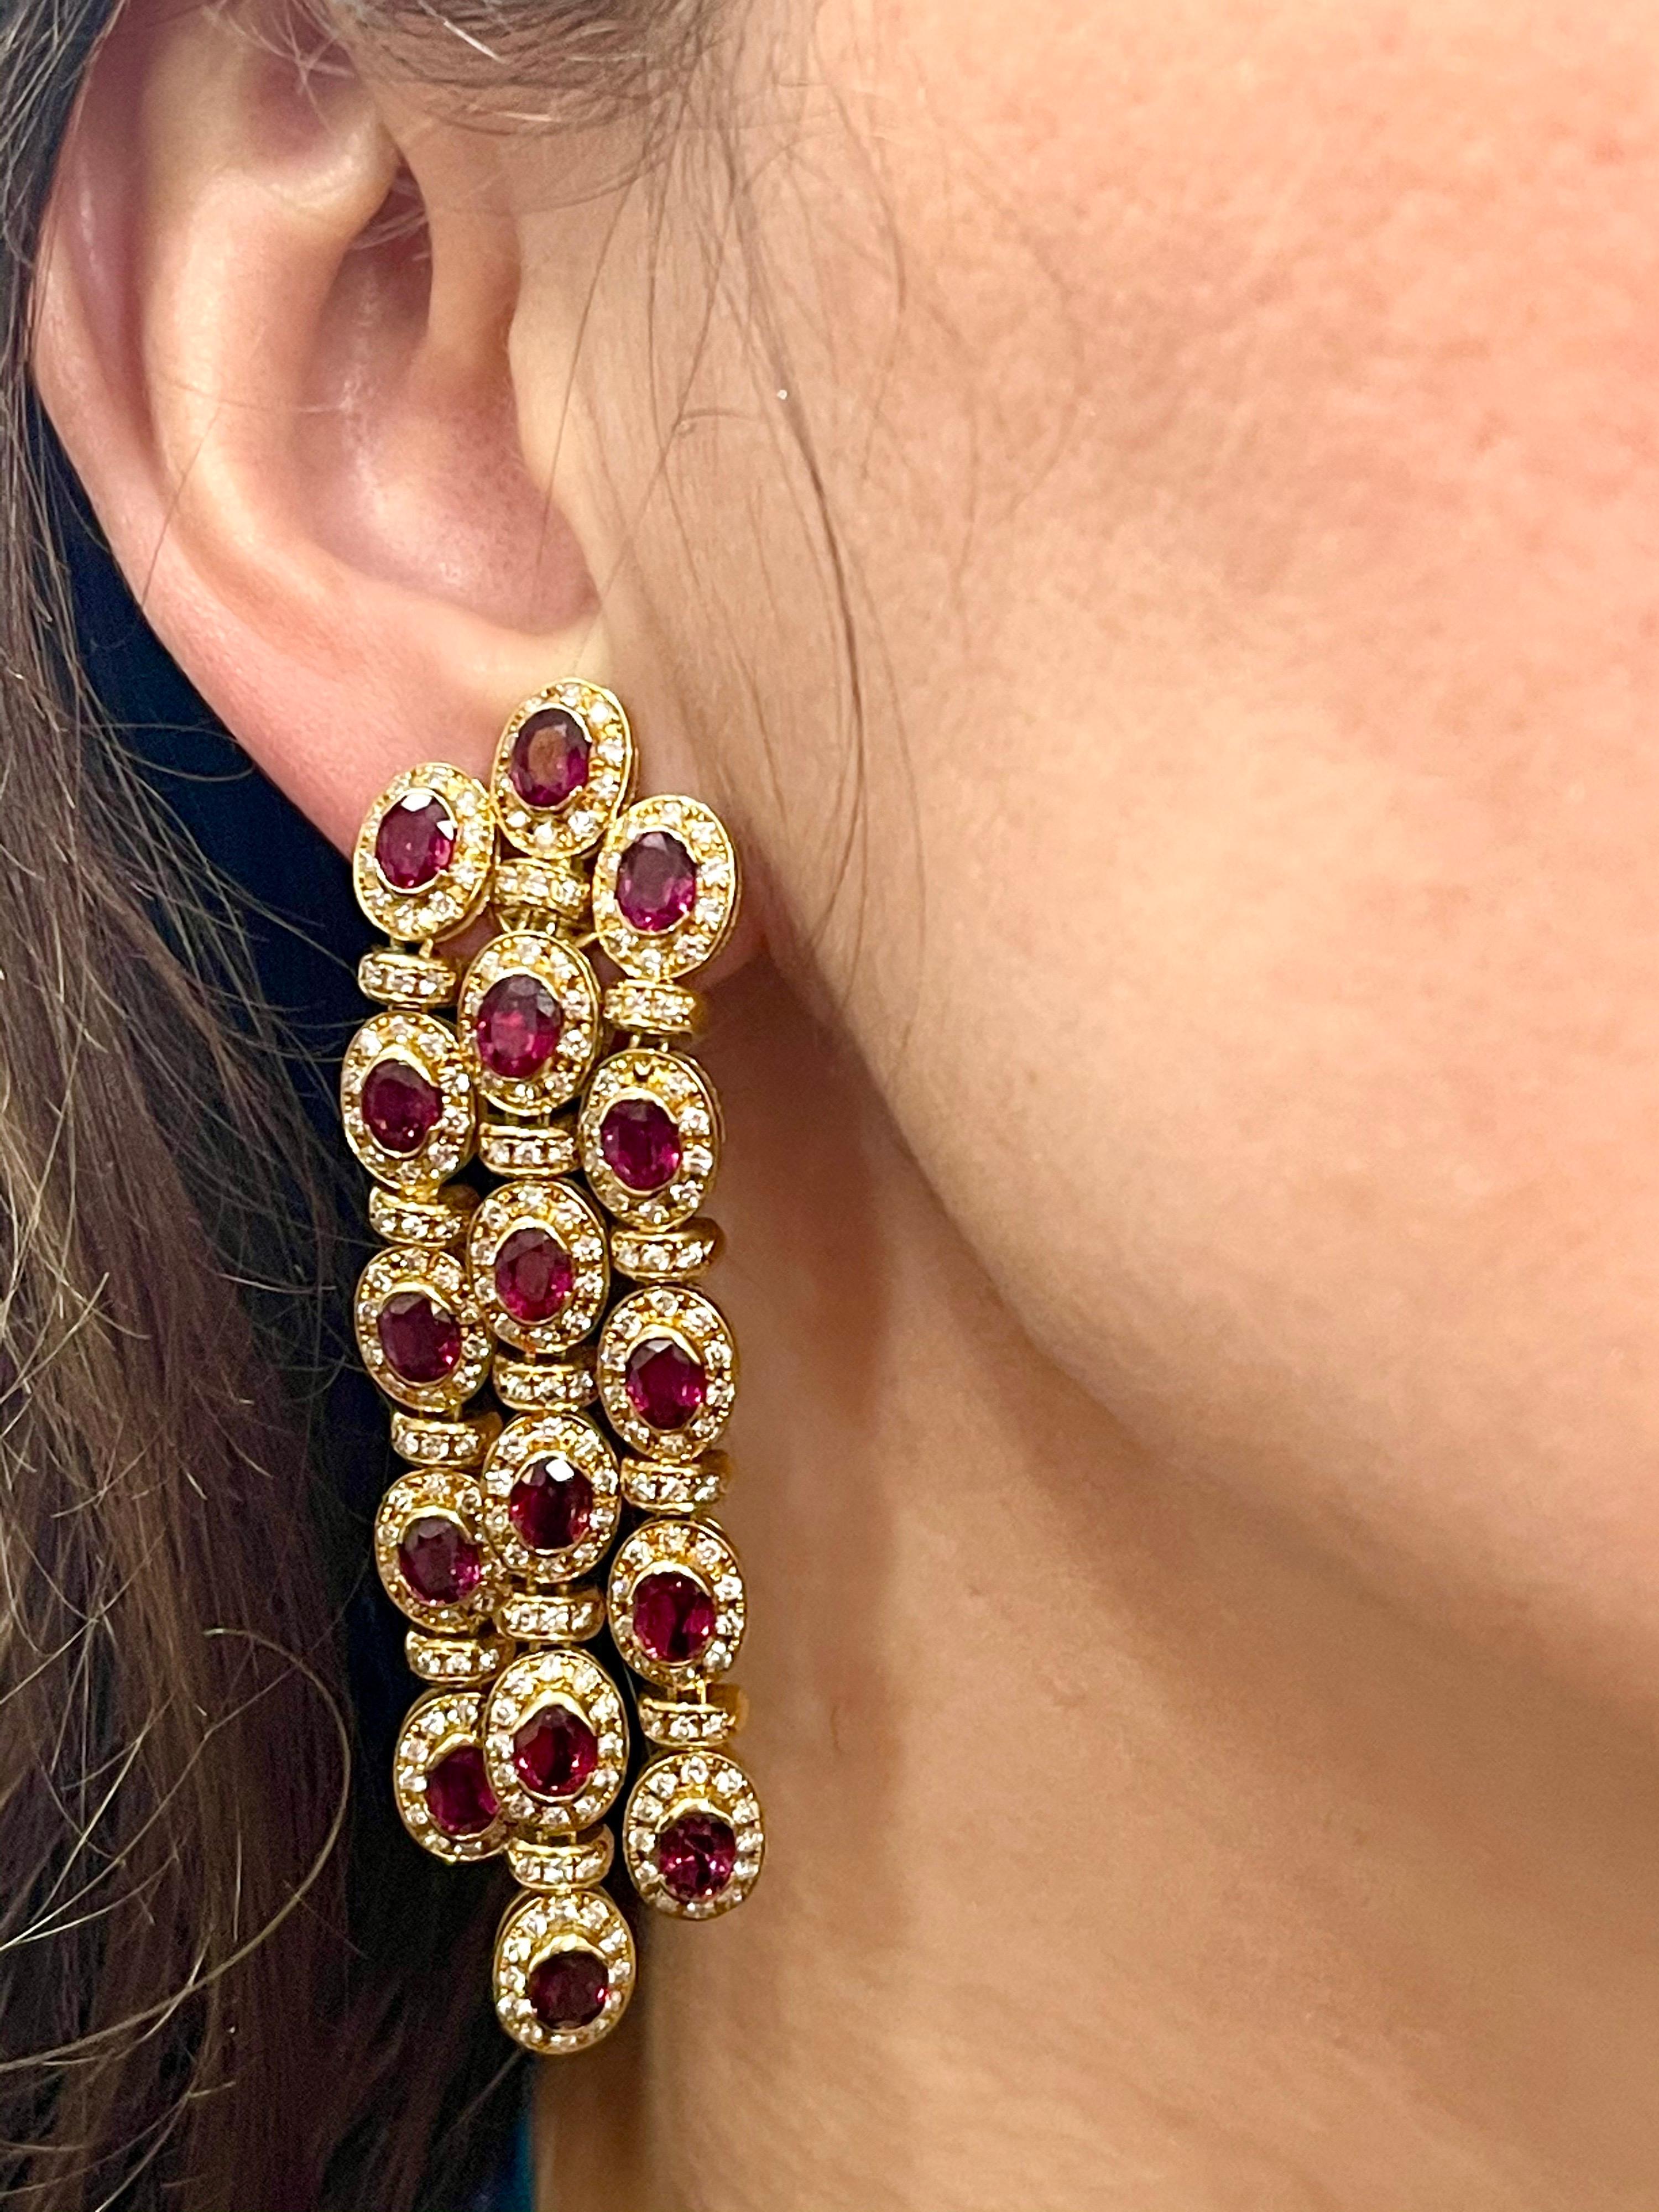 16 Ct Natural Burma Ruby & 10 Ct  Diamond Hanging/Drop Earrings 18 Kt Gold 35 Gm For Sale 3